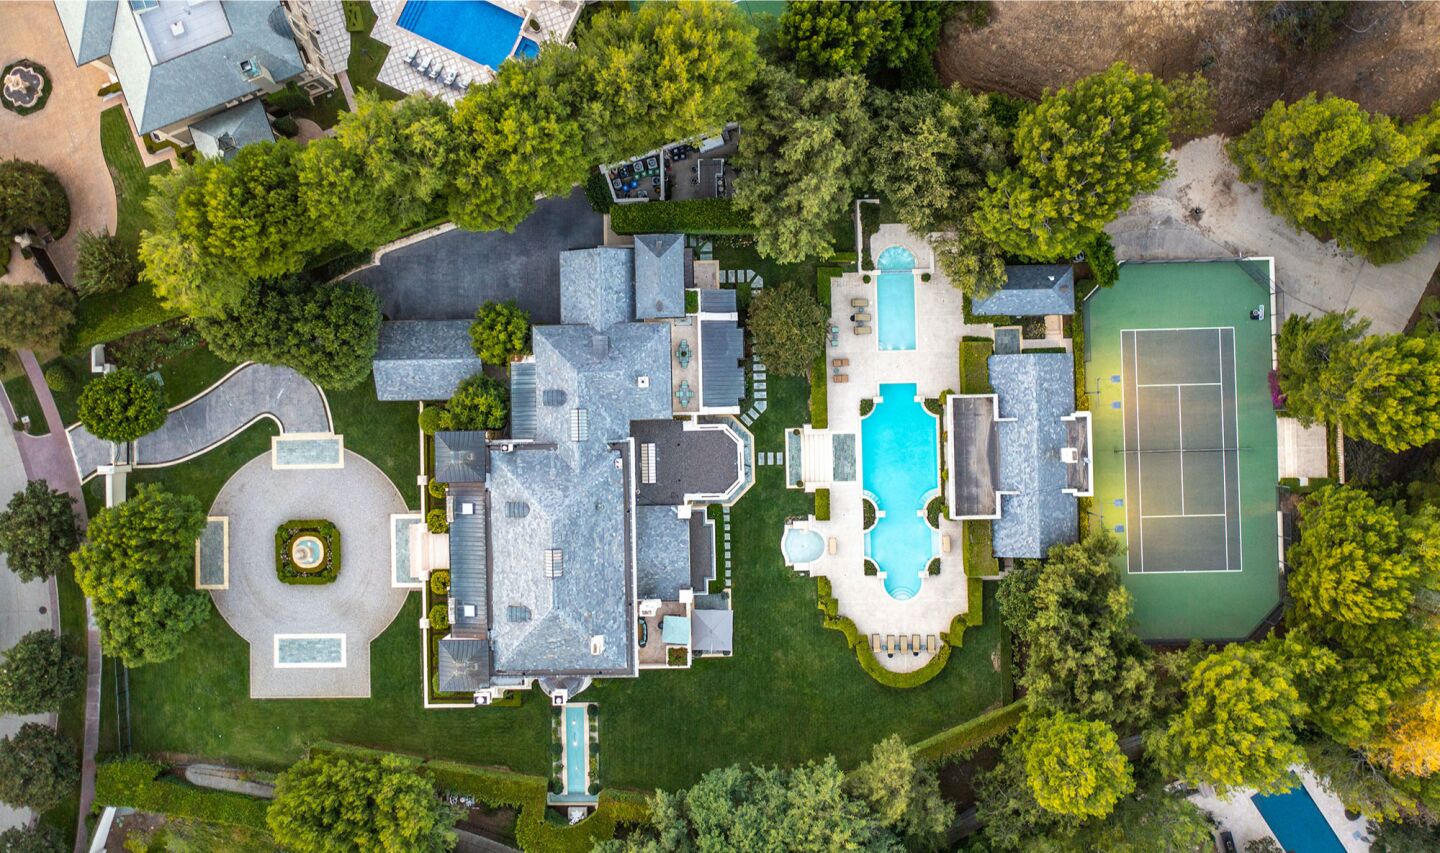 Aerial view of the estate showing the home, pool, tennis court and driveway.